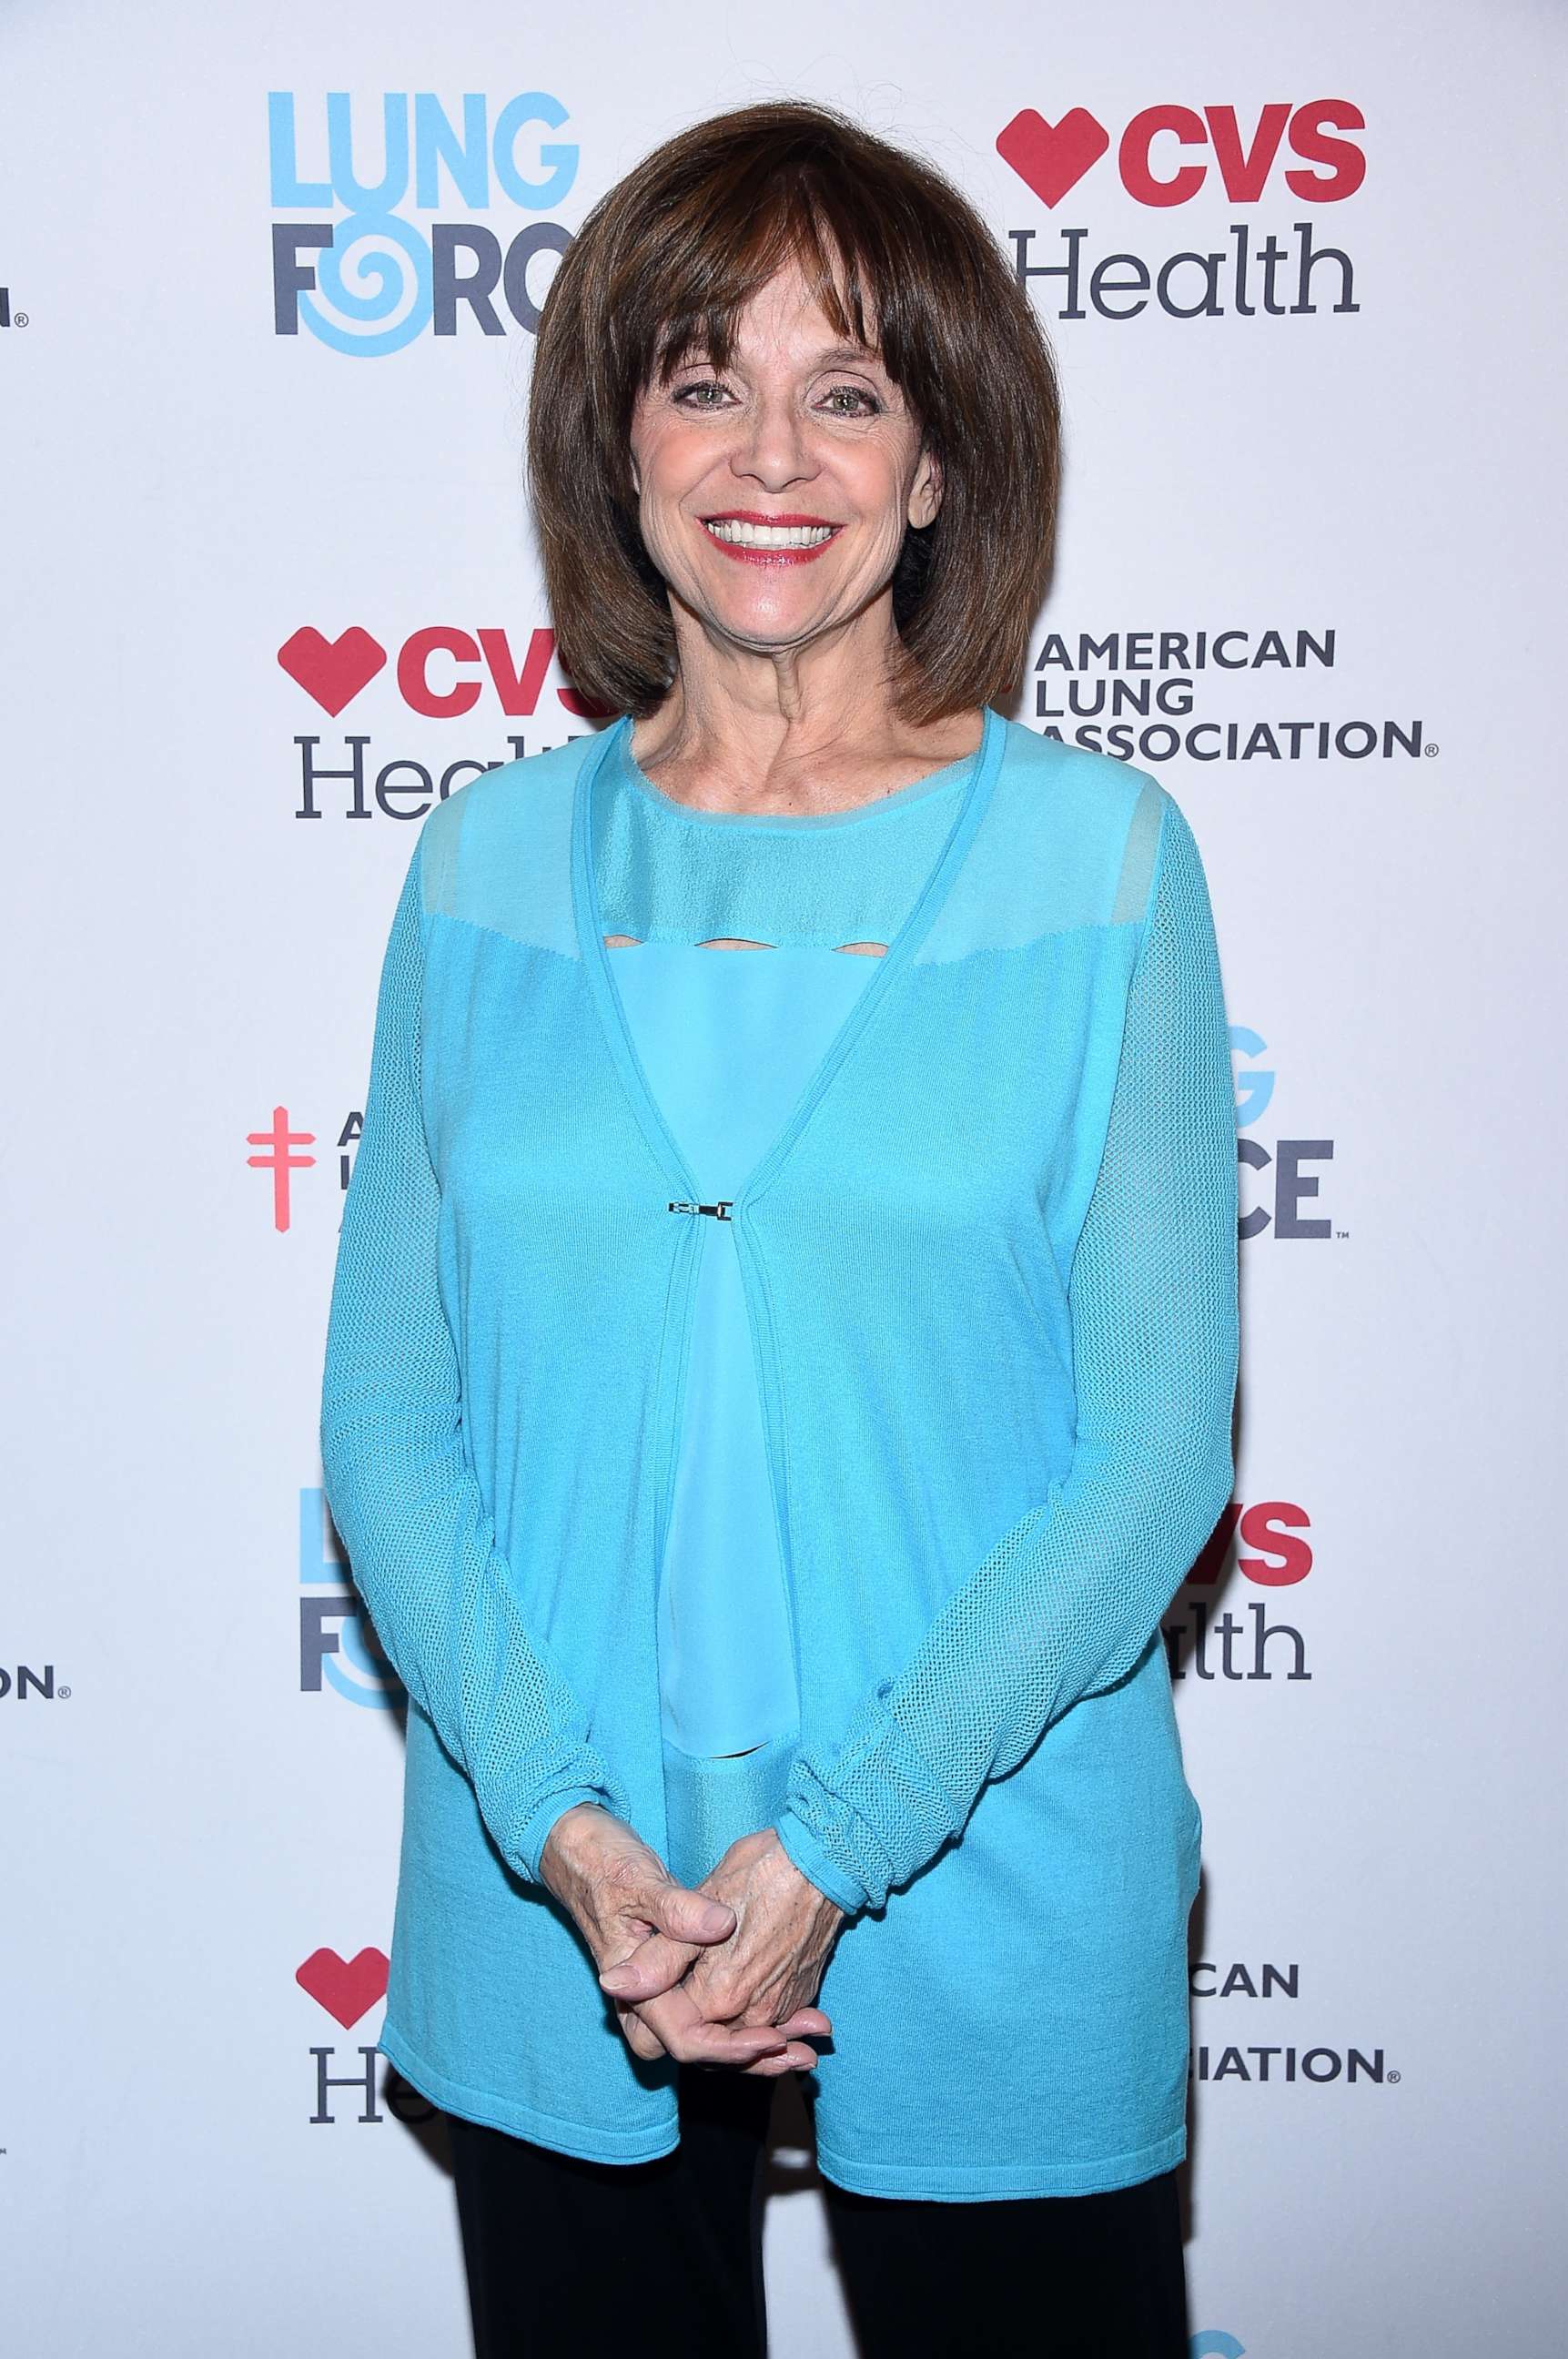 PHOTO: Valerie Harper steps out in New York City for the American Lung Association's LUNG FORCE as it launches its Share Your Voice initiative to raise awareness of the number one cancer killer of women, lung cancer, May 12, 2015, in New York. 